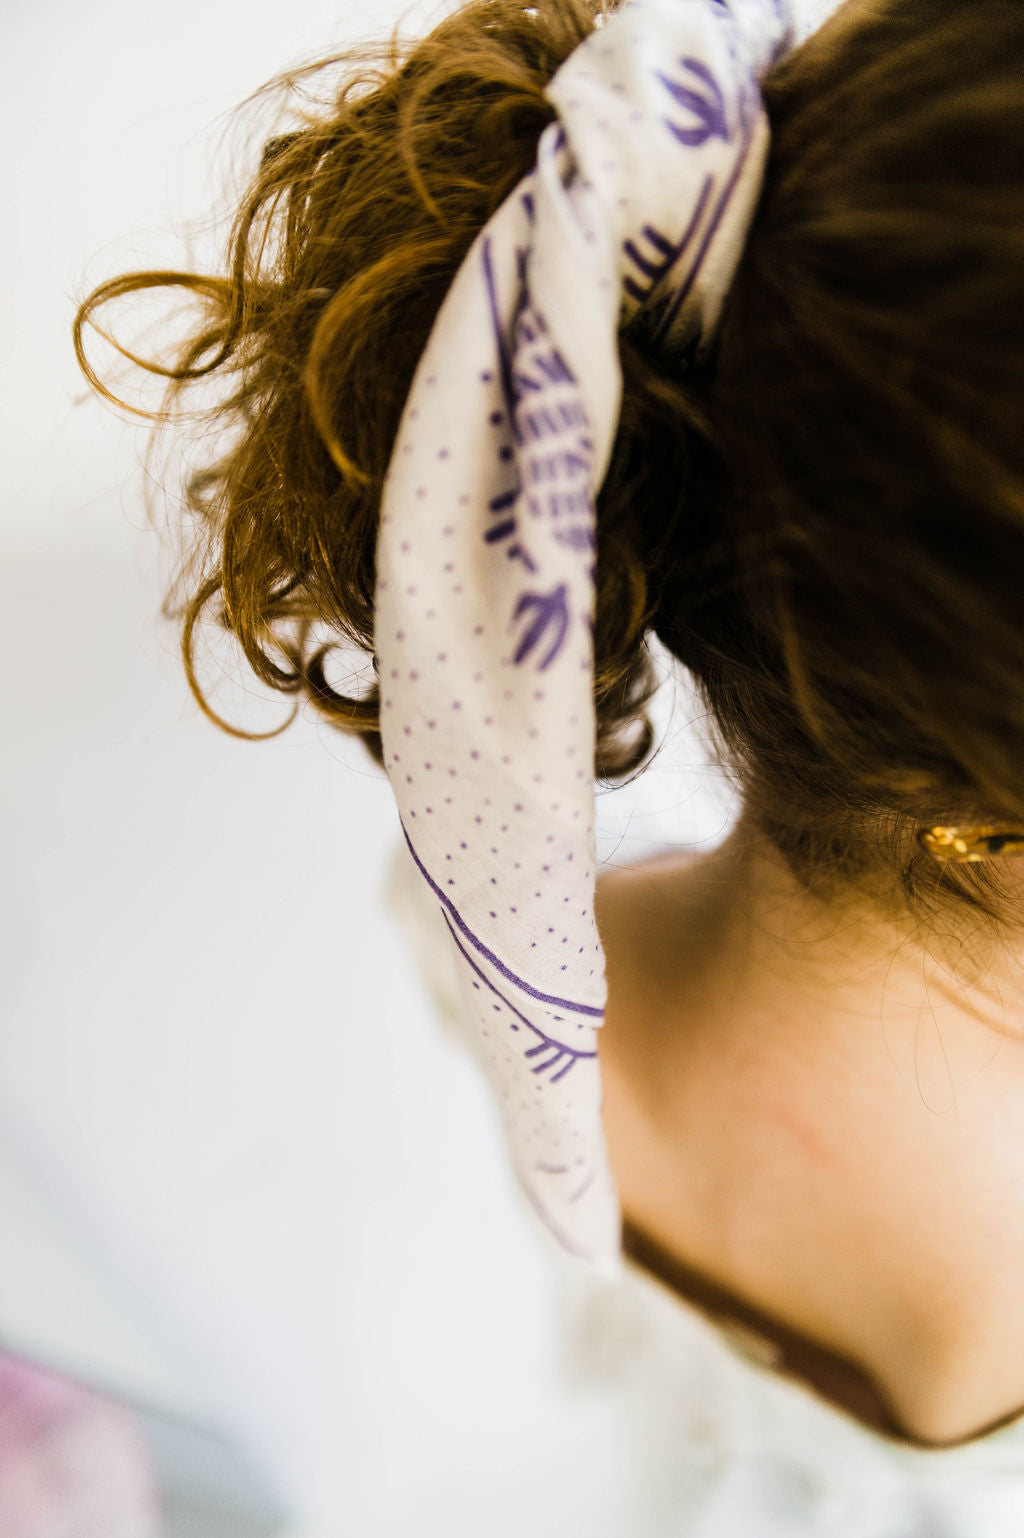 the design: ramble waves | trust the journey the colors: ﻿lilac + cream 100% cotton measures approx. 18in. x 18in. wash with like colors, tumble dry low or hang to dry. These bandanas were thoughtfully designed by Ramble and Co. These bandanas: thinner and soft compared to our Hemlock Bandanas. Ideal for tying in your hair (as a headband or around ponytail) + wearing around your neck! due to the dying process slight variations should be expected & unique imperfections making each item one-of-a-kind.